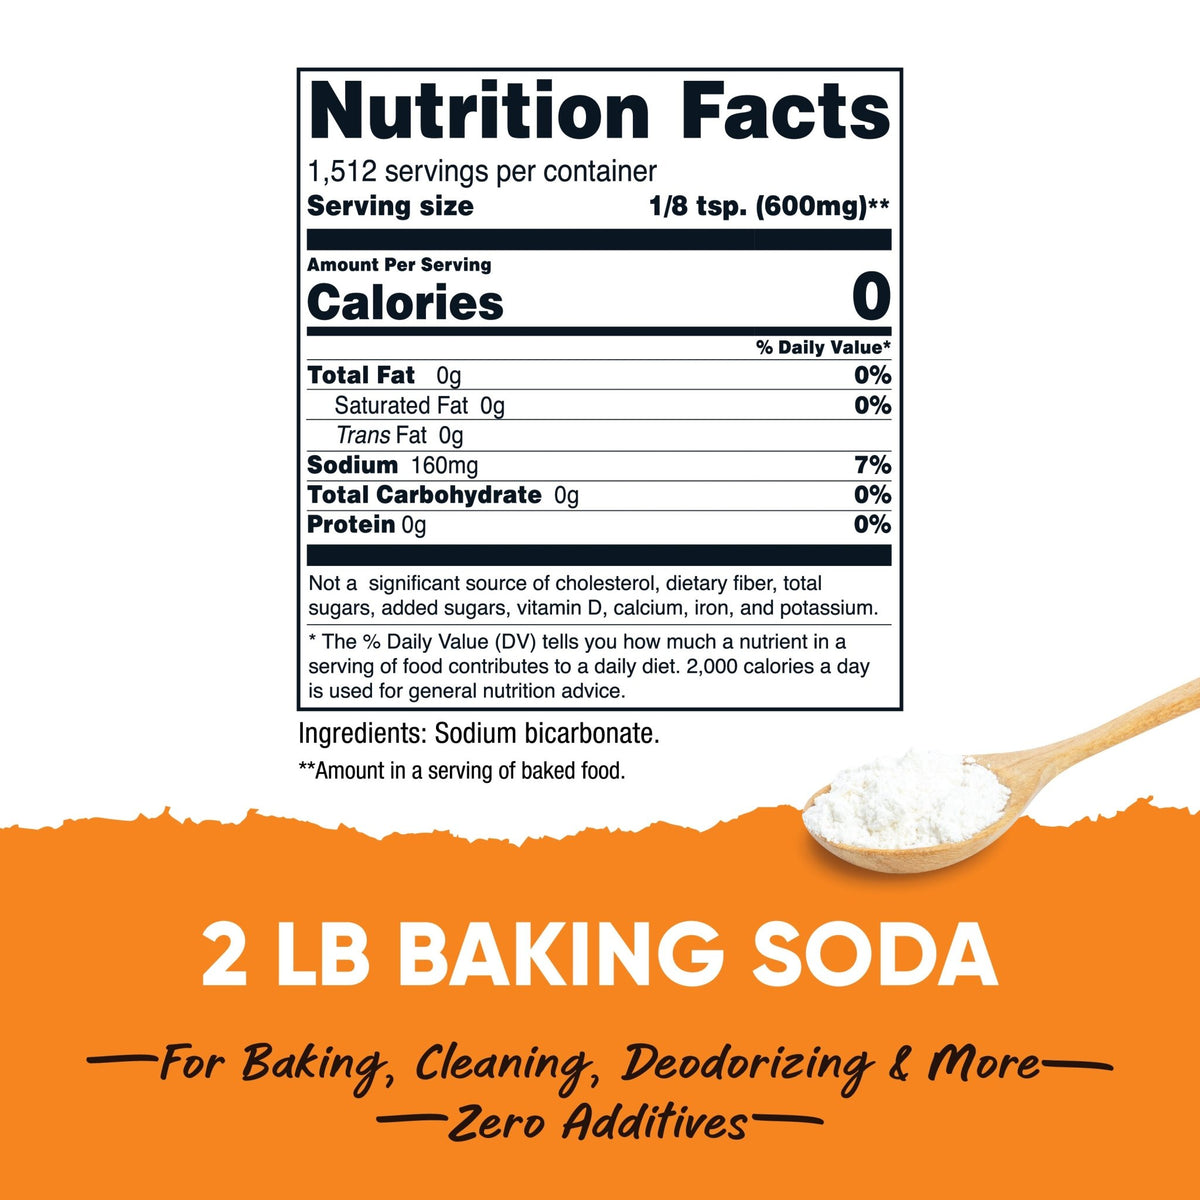 36 Baking Soda Uses You Should Know - HICAPS Mktg. Corp.